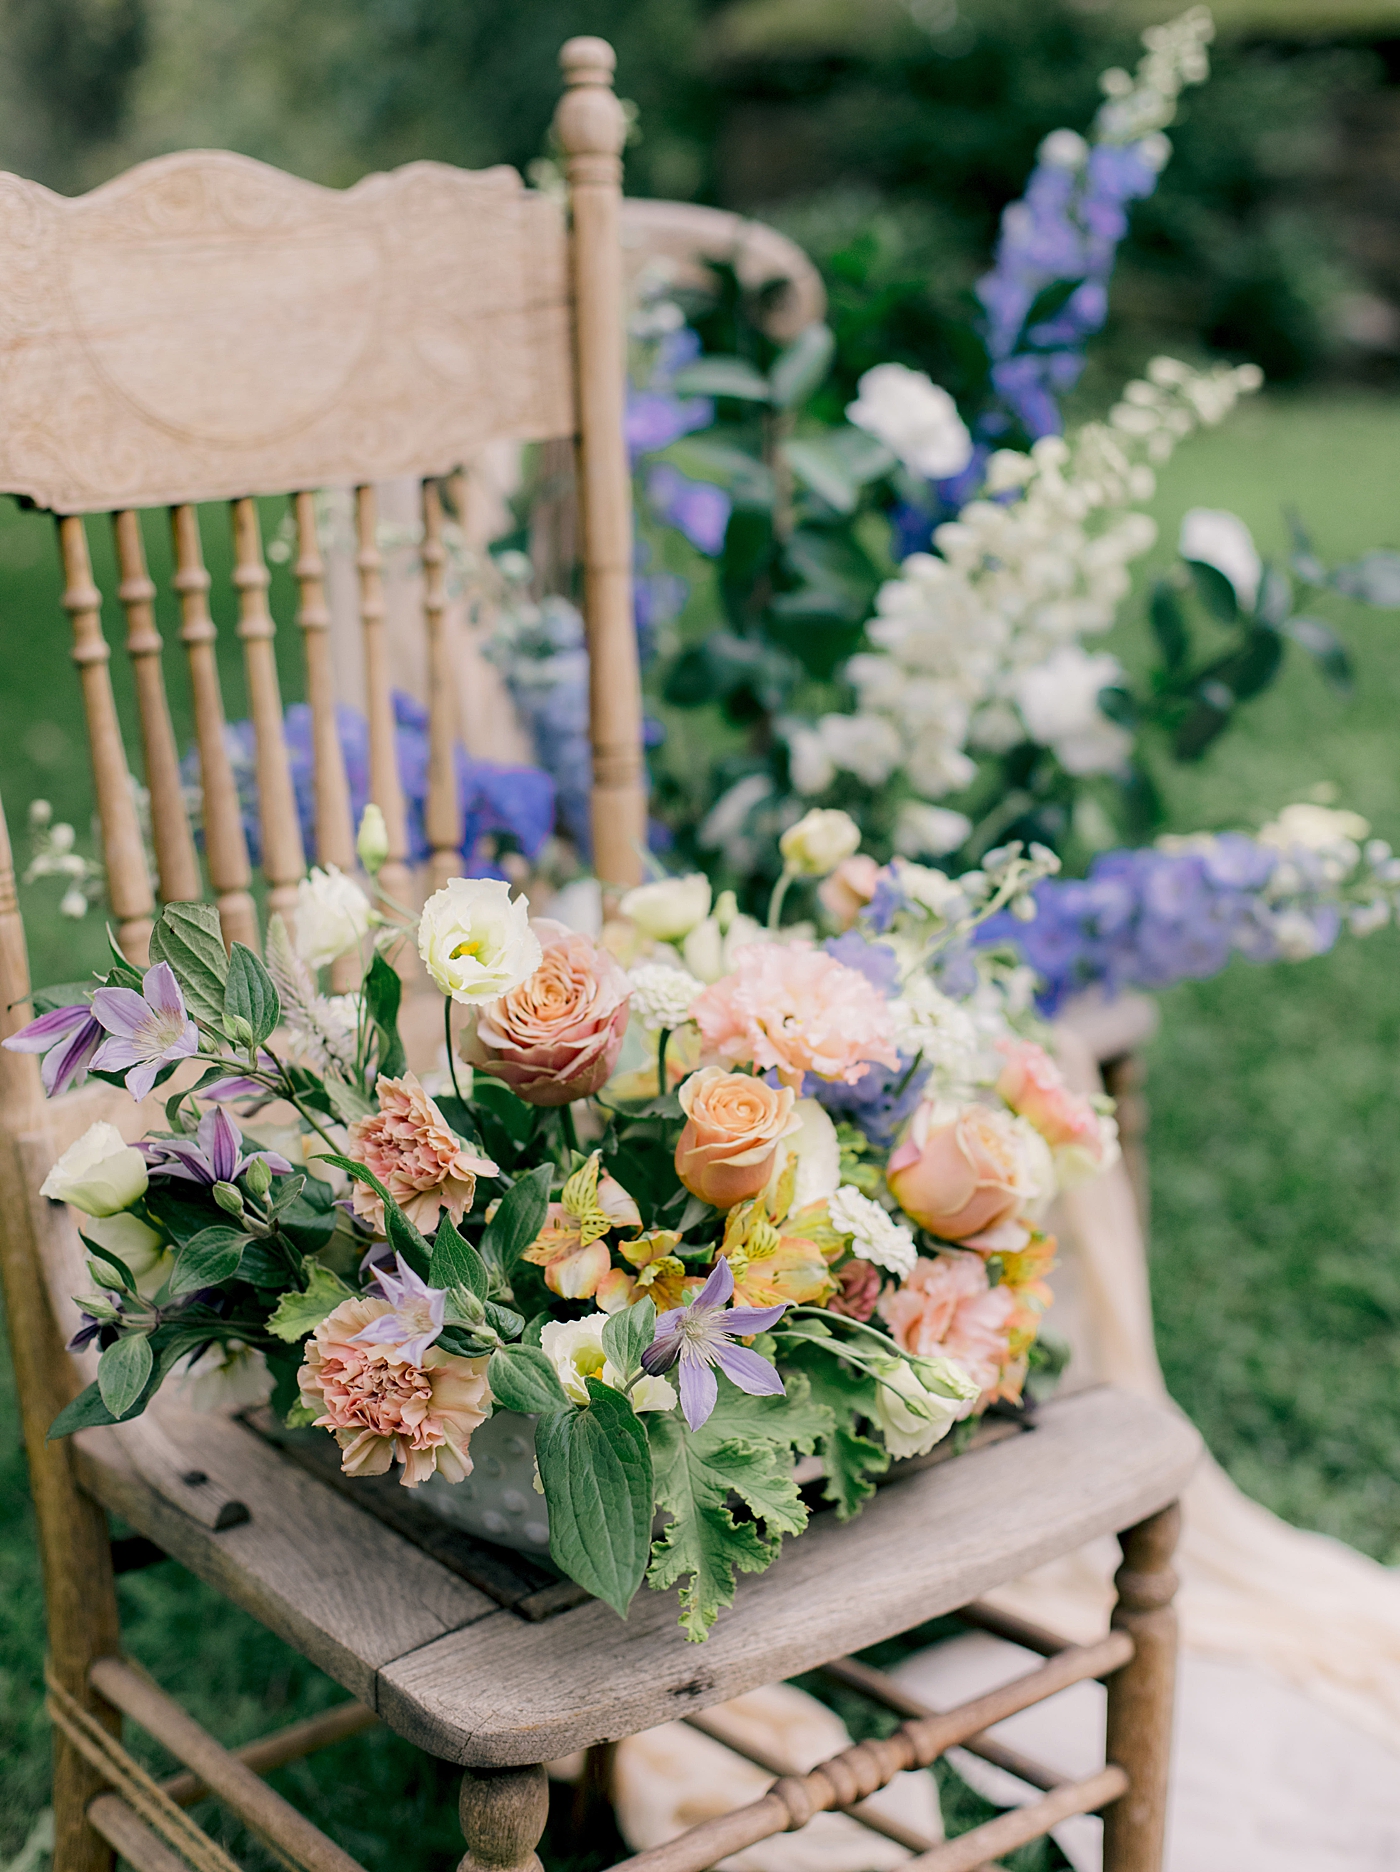 Styled florals on an antique chair | Styling and Planning Engagement Sessions with Hope Helmuth Photography